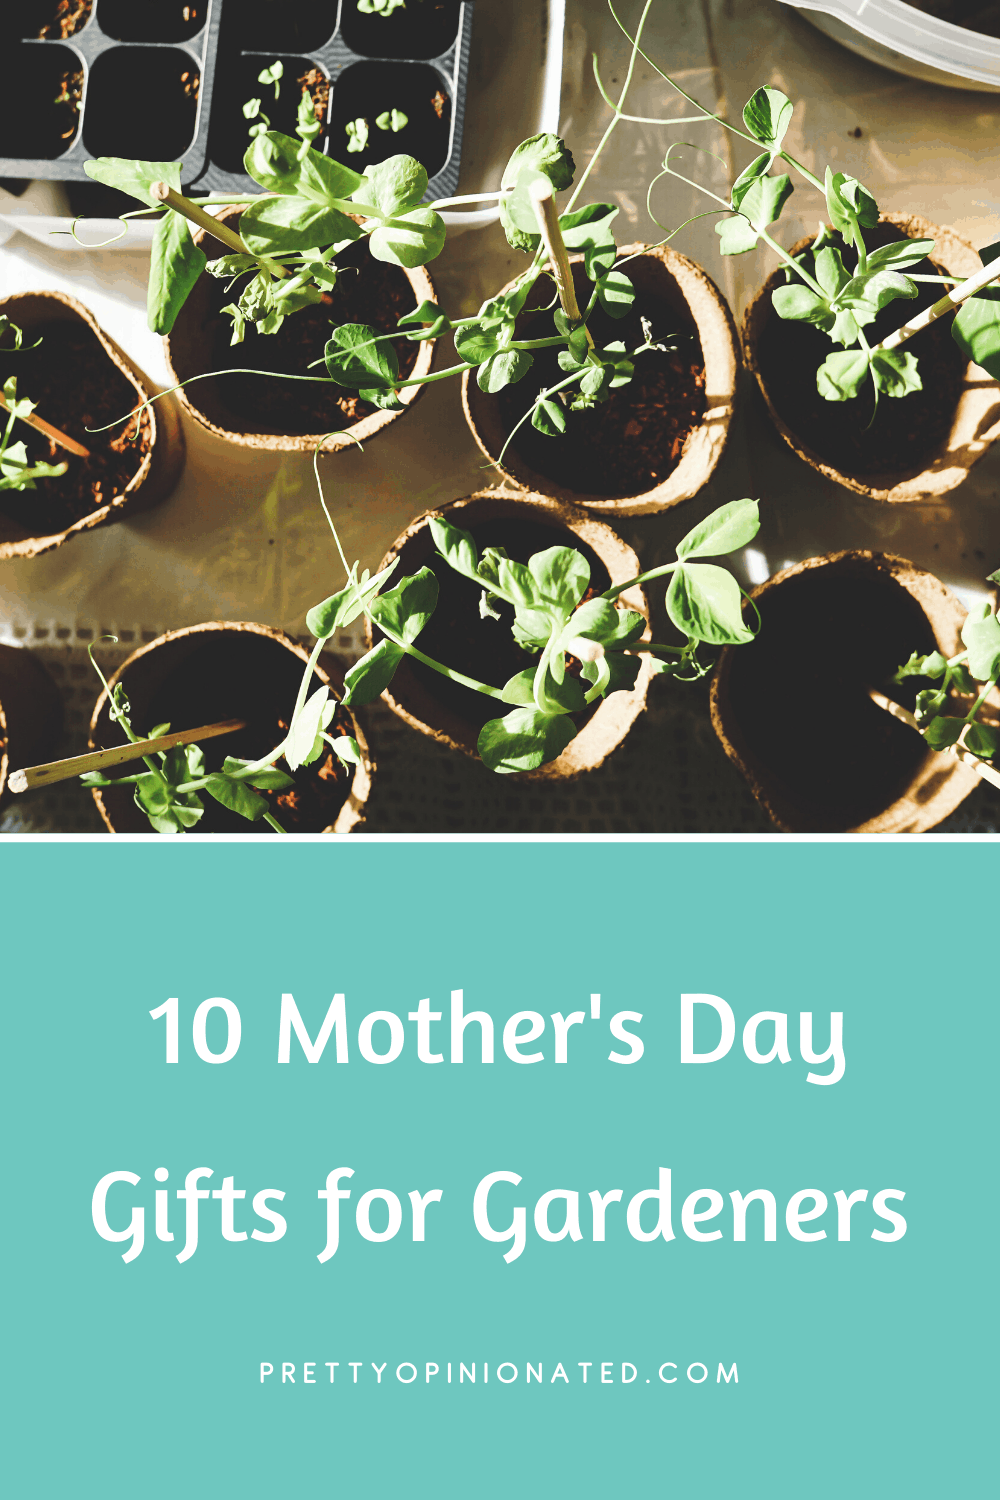 When you’re buying for someone who loves spending time in the garden, there’s a huge selection of great gift ideas out there. These 10 Great Gift Ideas for Mothers Who Love Gardening will help you find the perfect present!